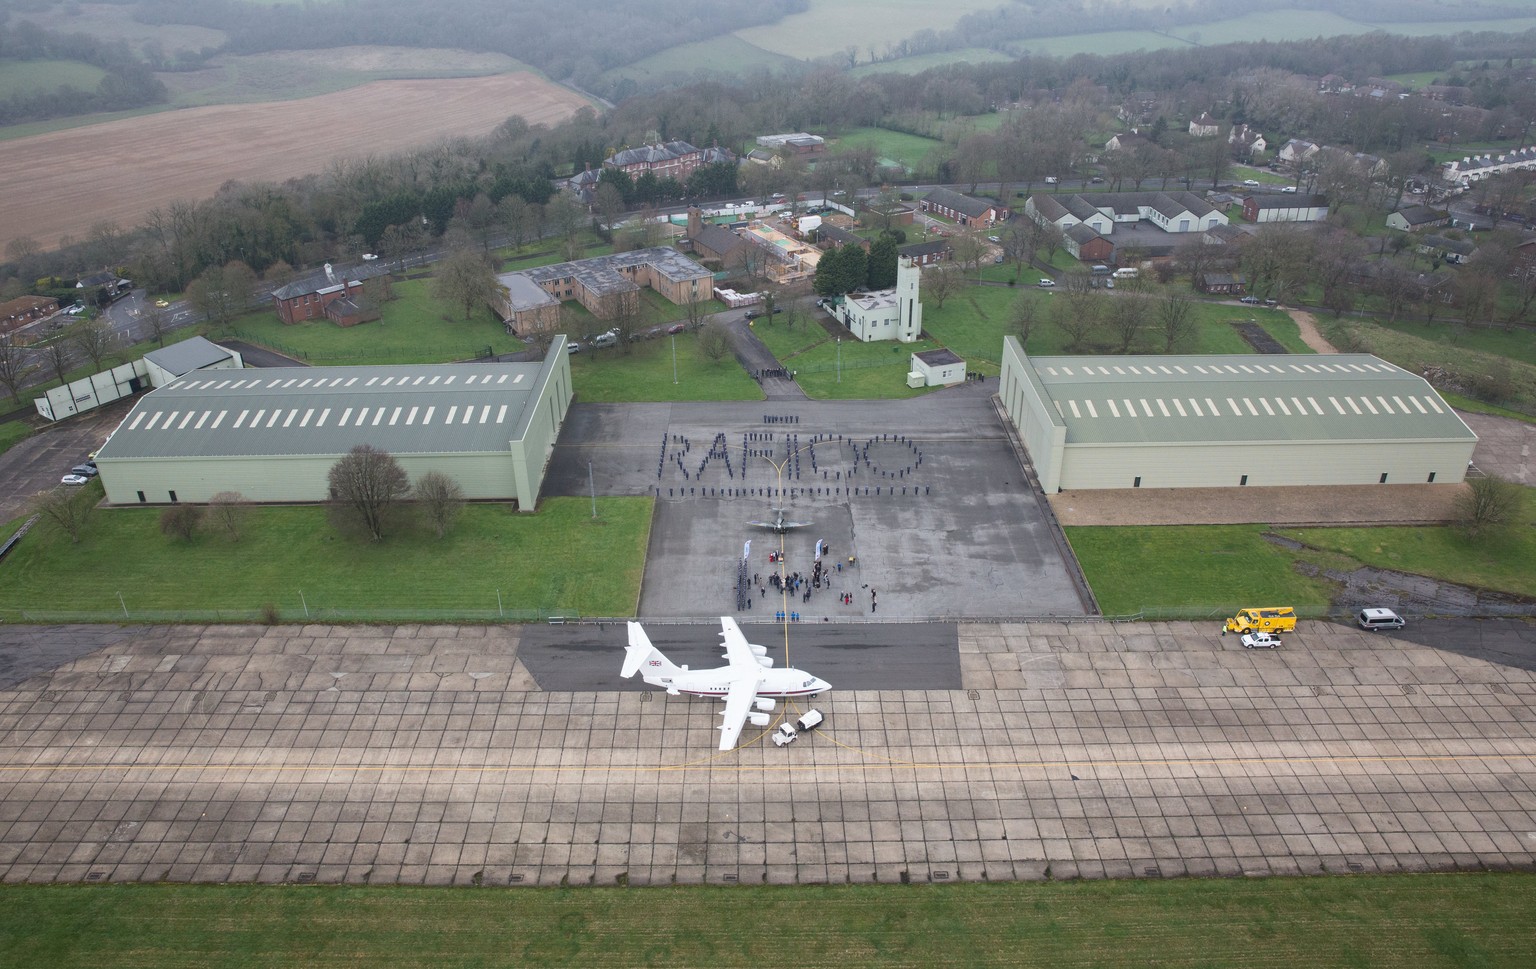 epa06667084 A handout photo made available by the British Ministry of Defence (MoD) showing RAF 100 on the tarmac at Biggin Hill airport in Kent, Southern England, 13 April 2018. Two Royal Air Force v ...